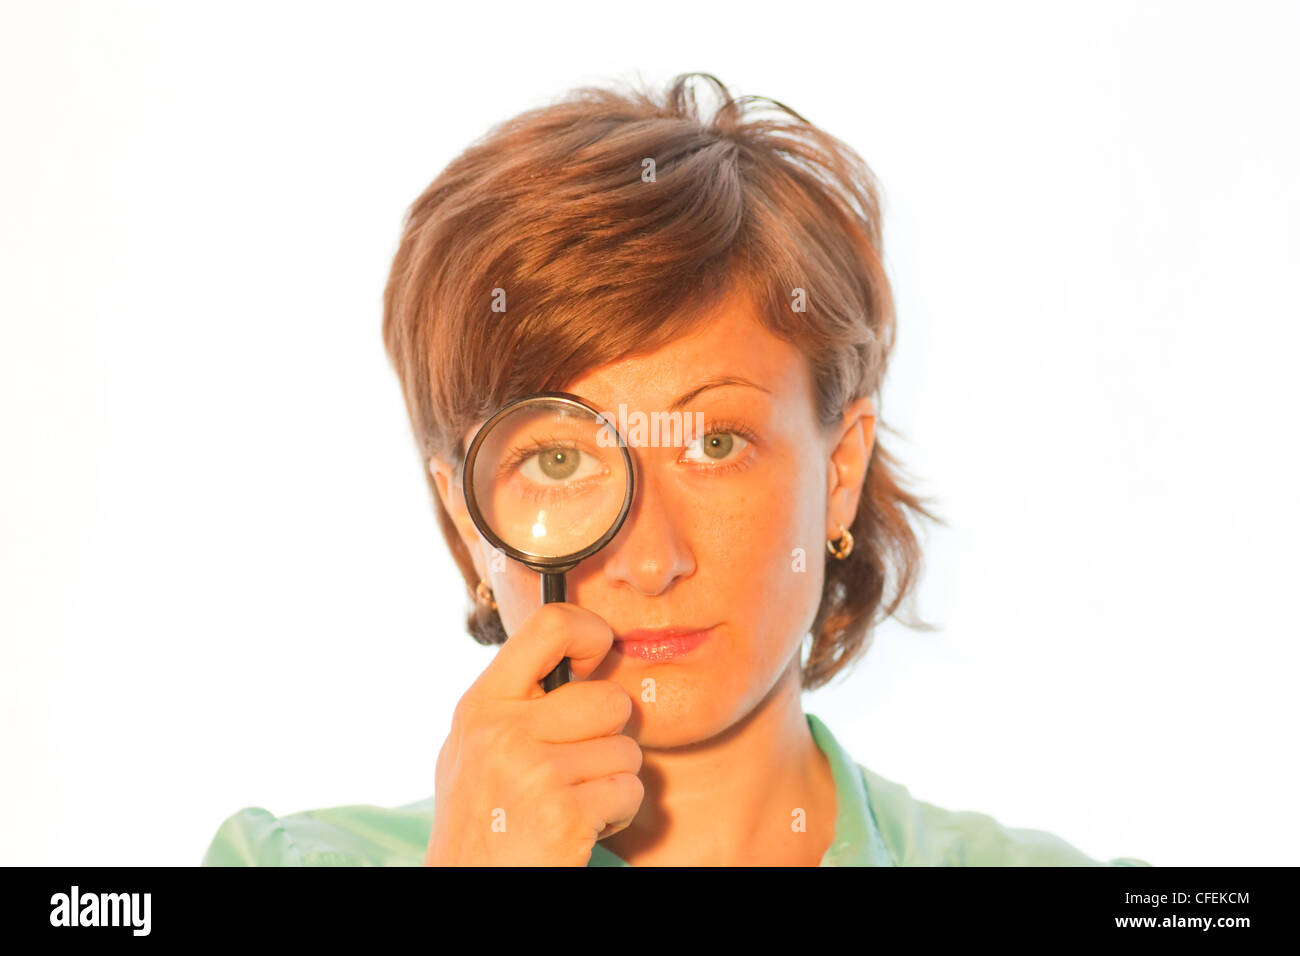 Woman with magnifier lens on eye Stock Photo